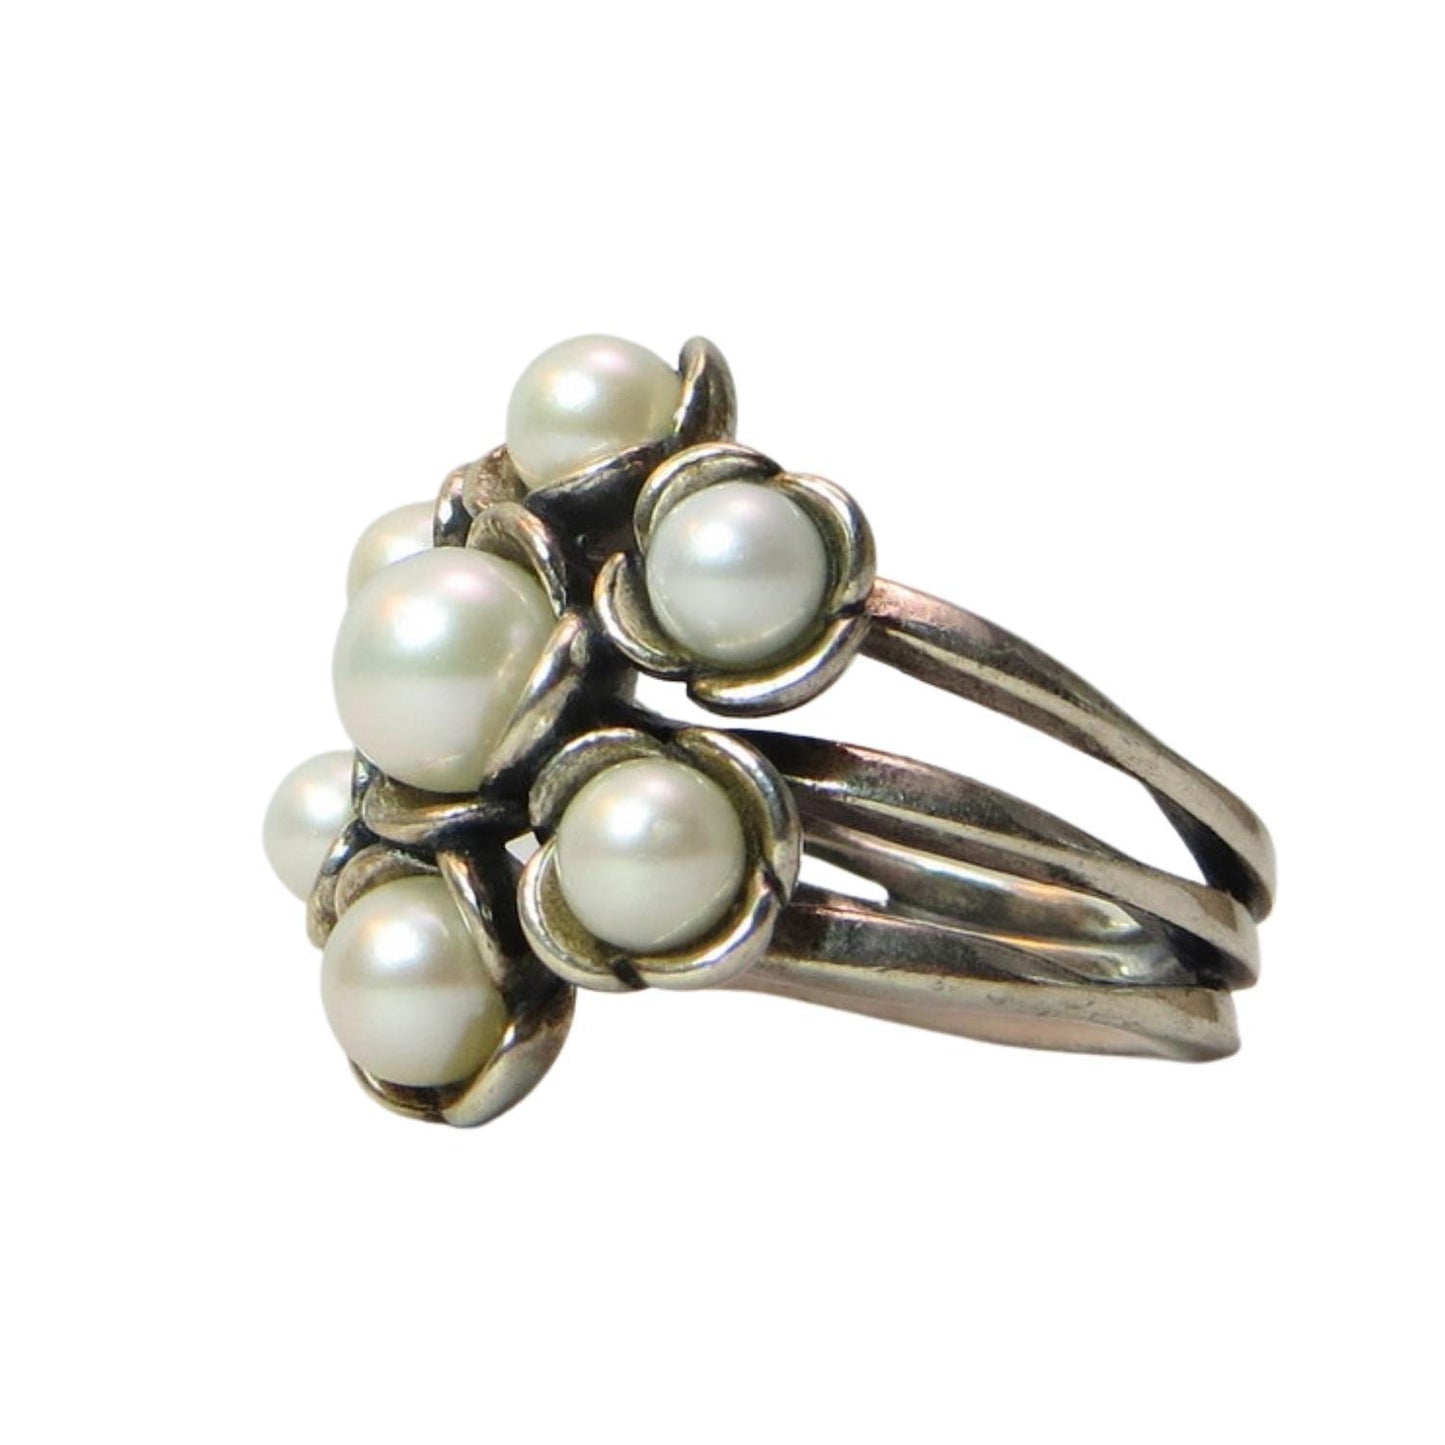 Pandora WISHFUL THINKING Sterling Silver and Pearl Ring 190887P.  Seven pearls each set in a sterling flower sit atop 3 thin adjoining sterling bands.